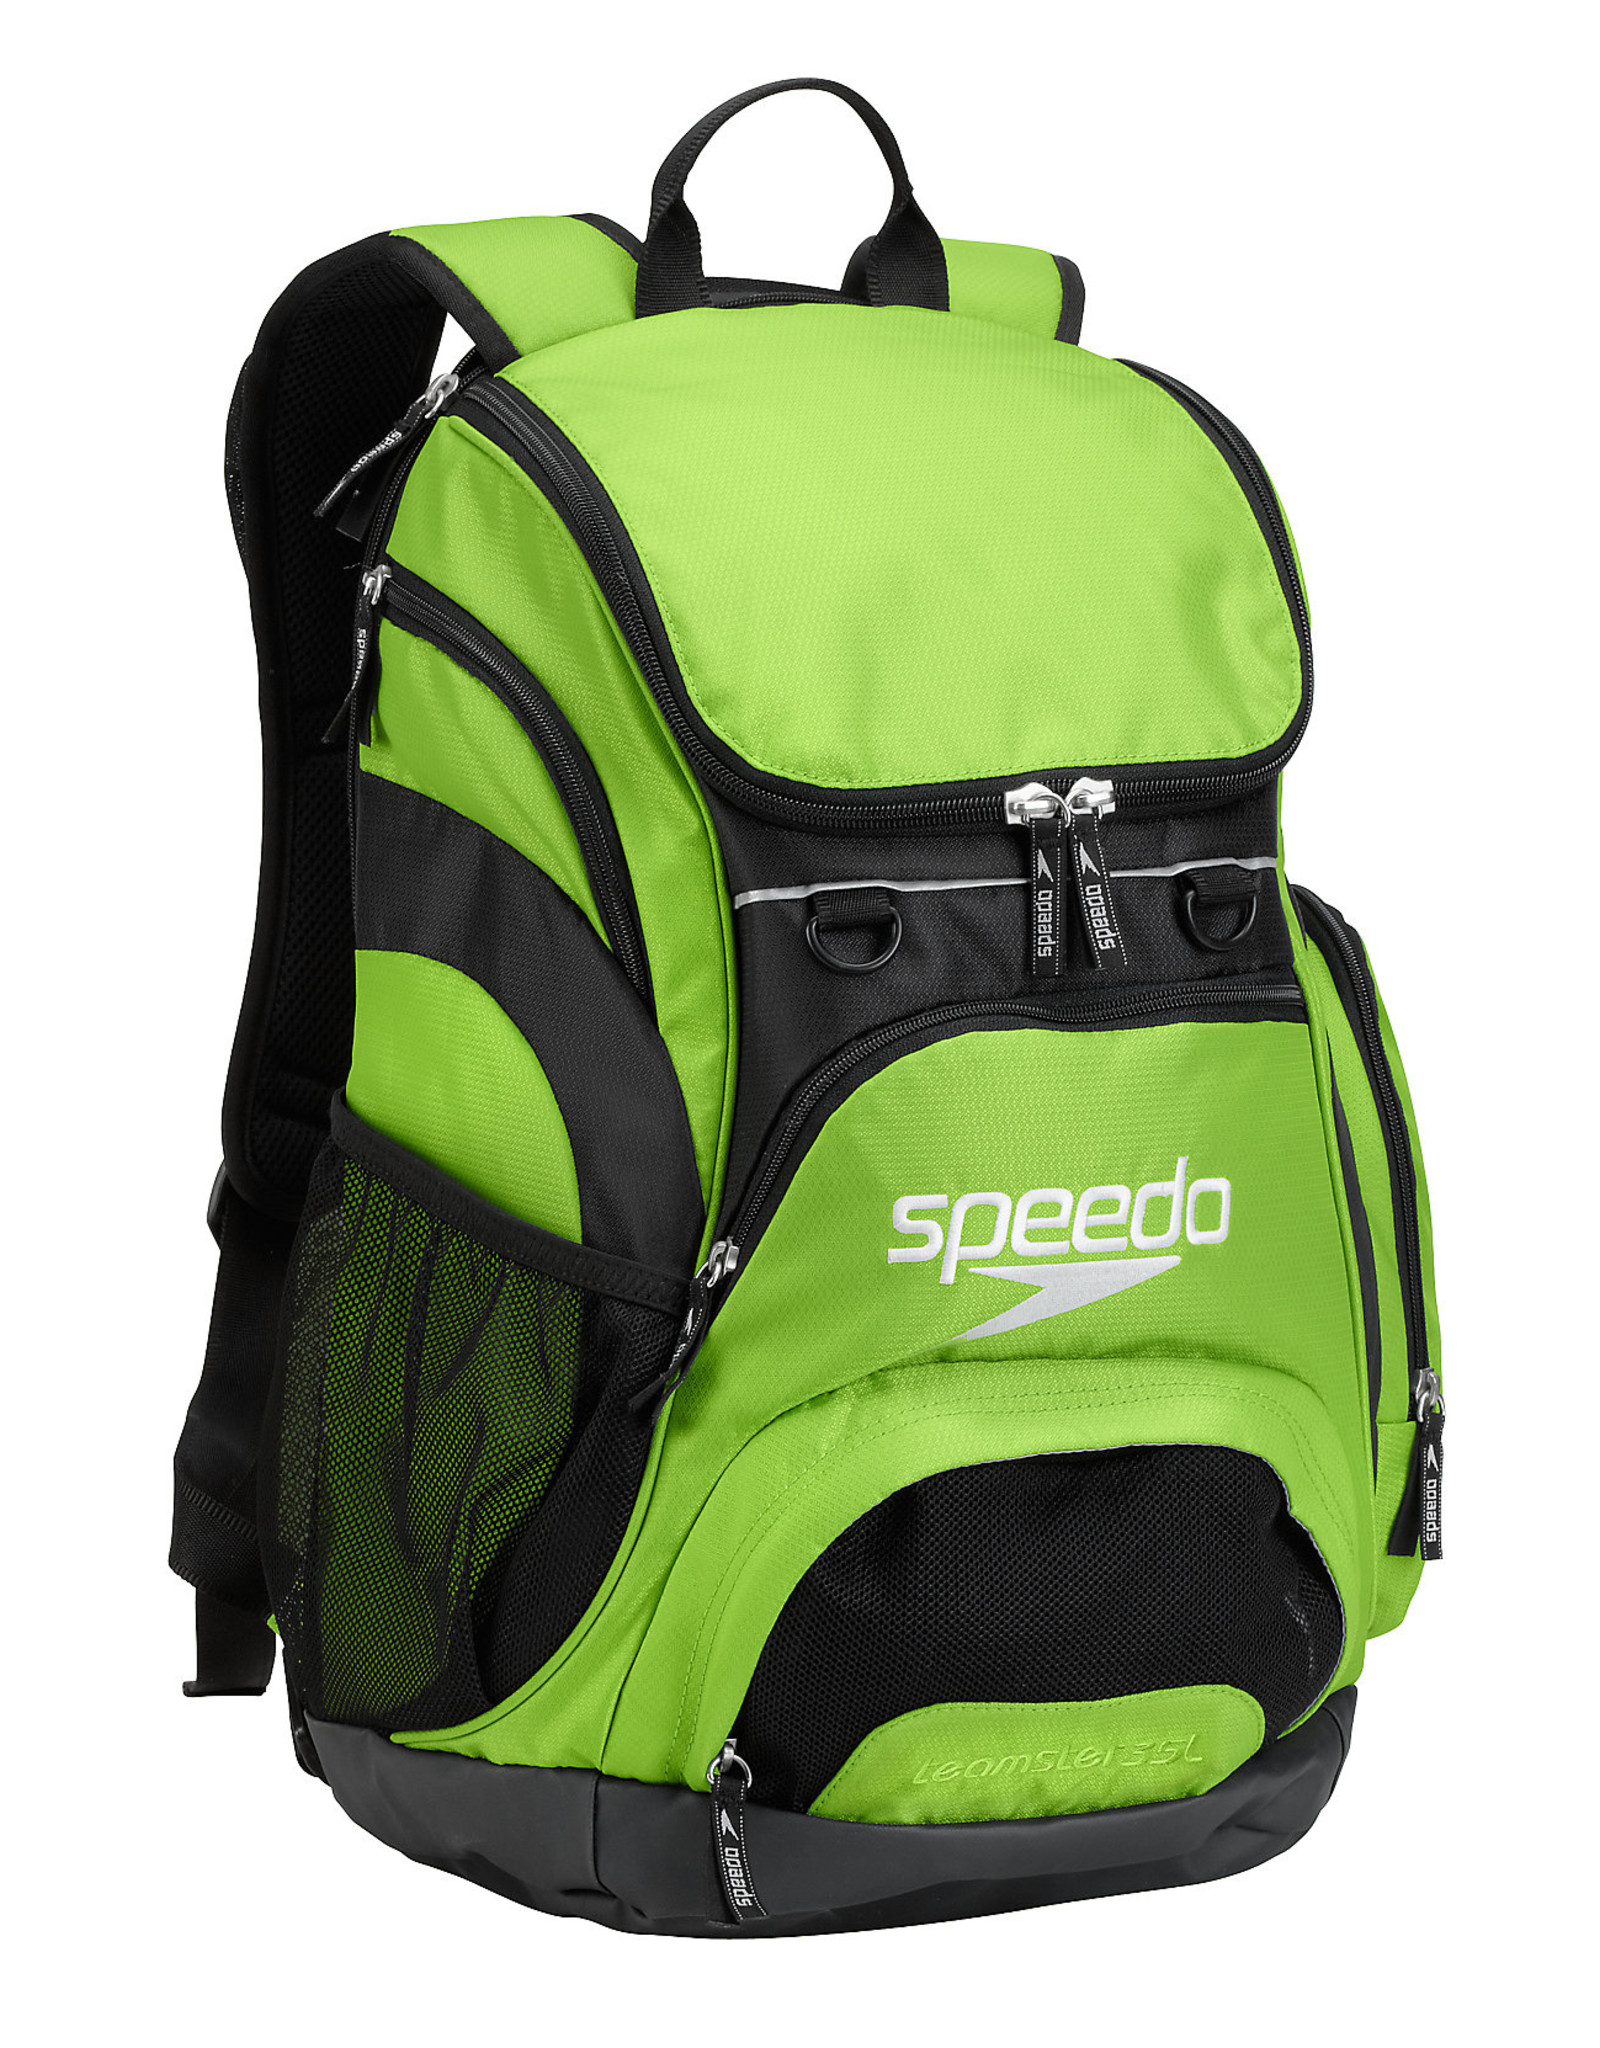 dirt bag speedo Clearance Sale | Find the best prices and places to buy